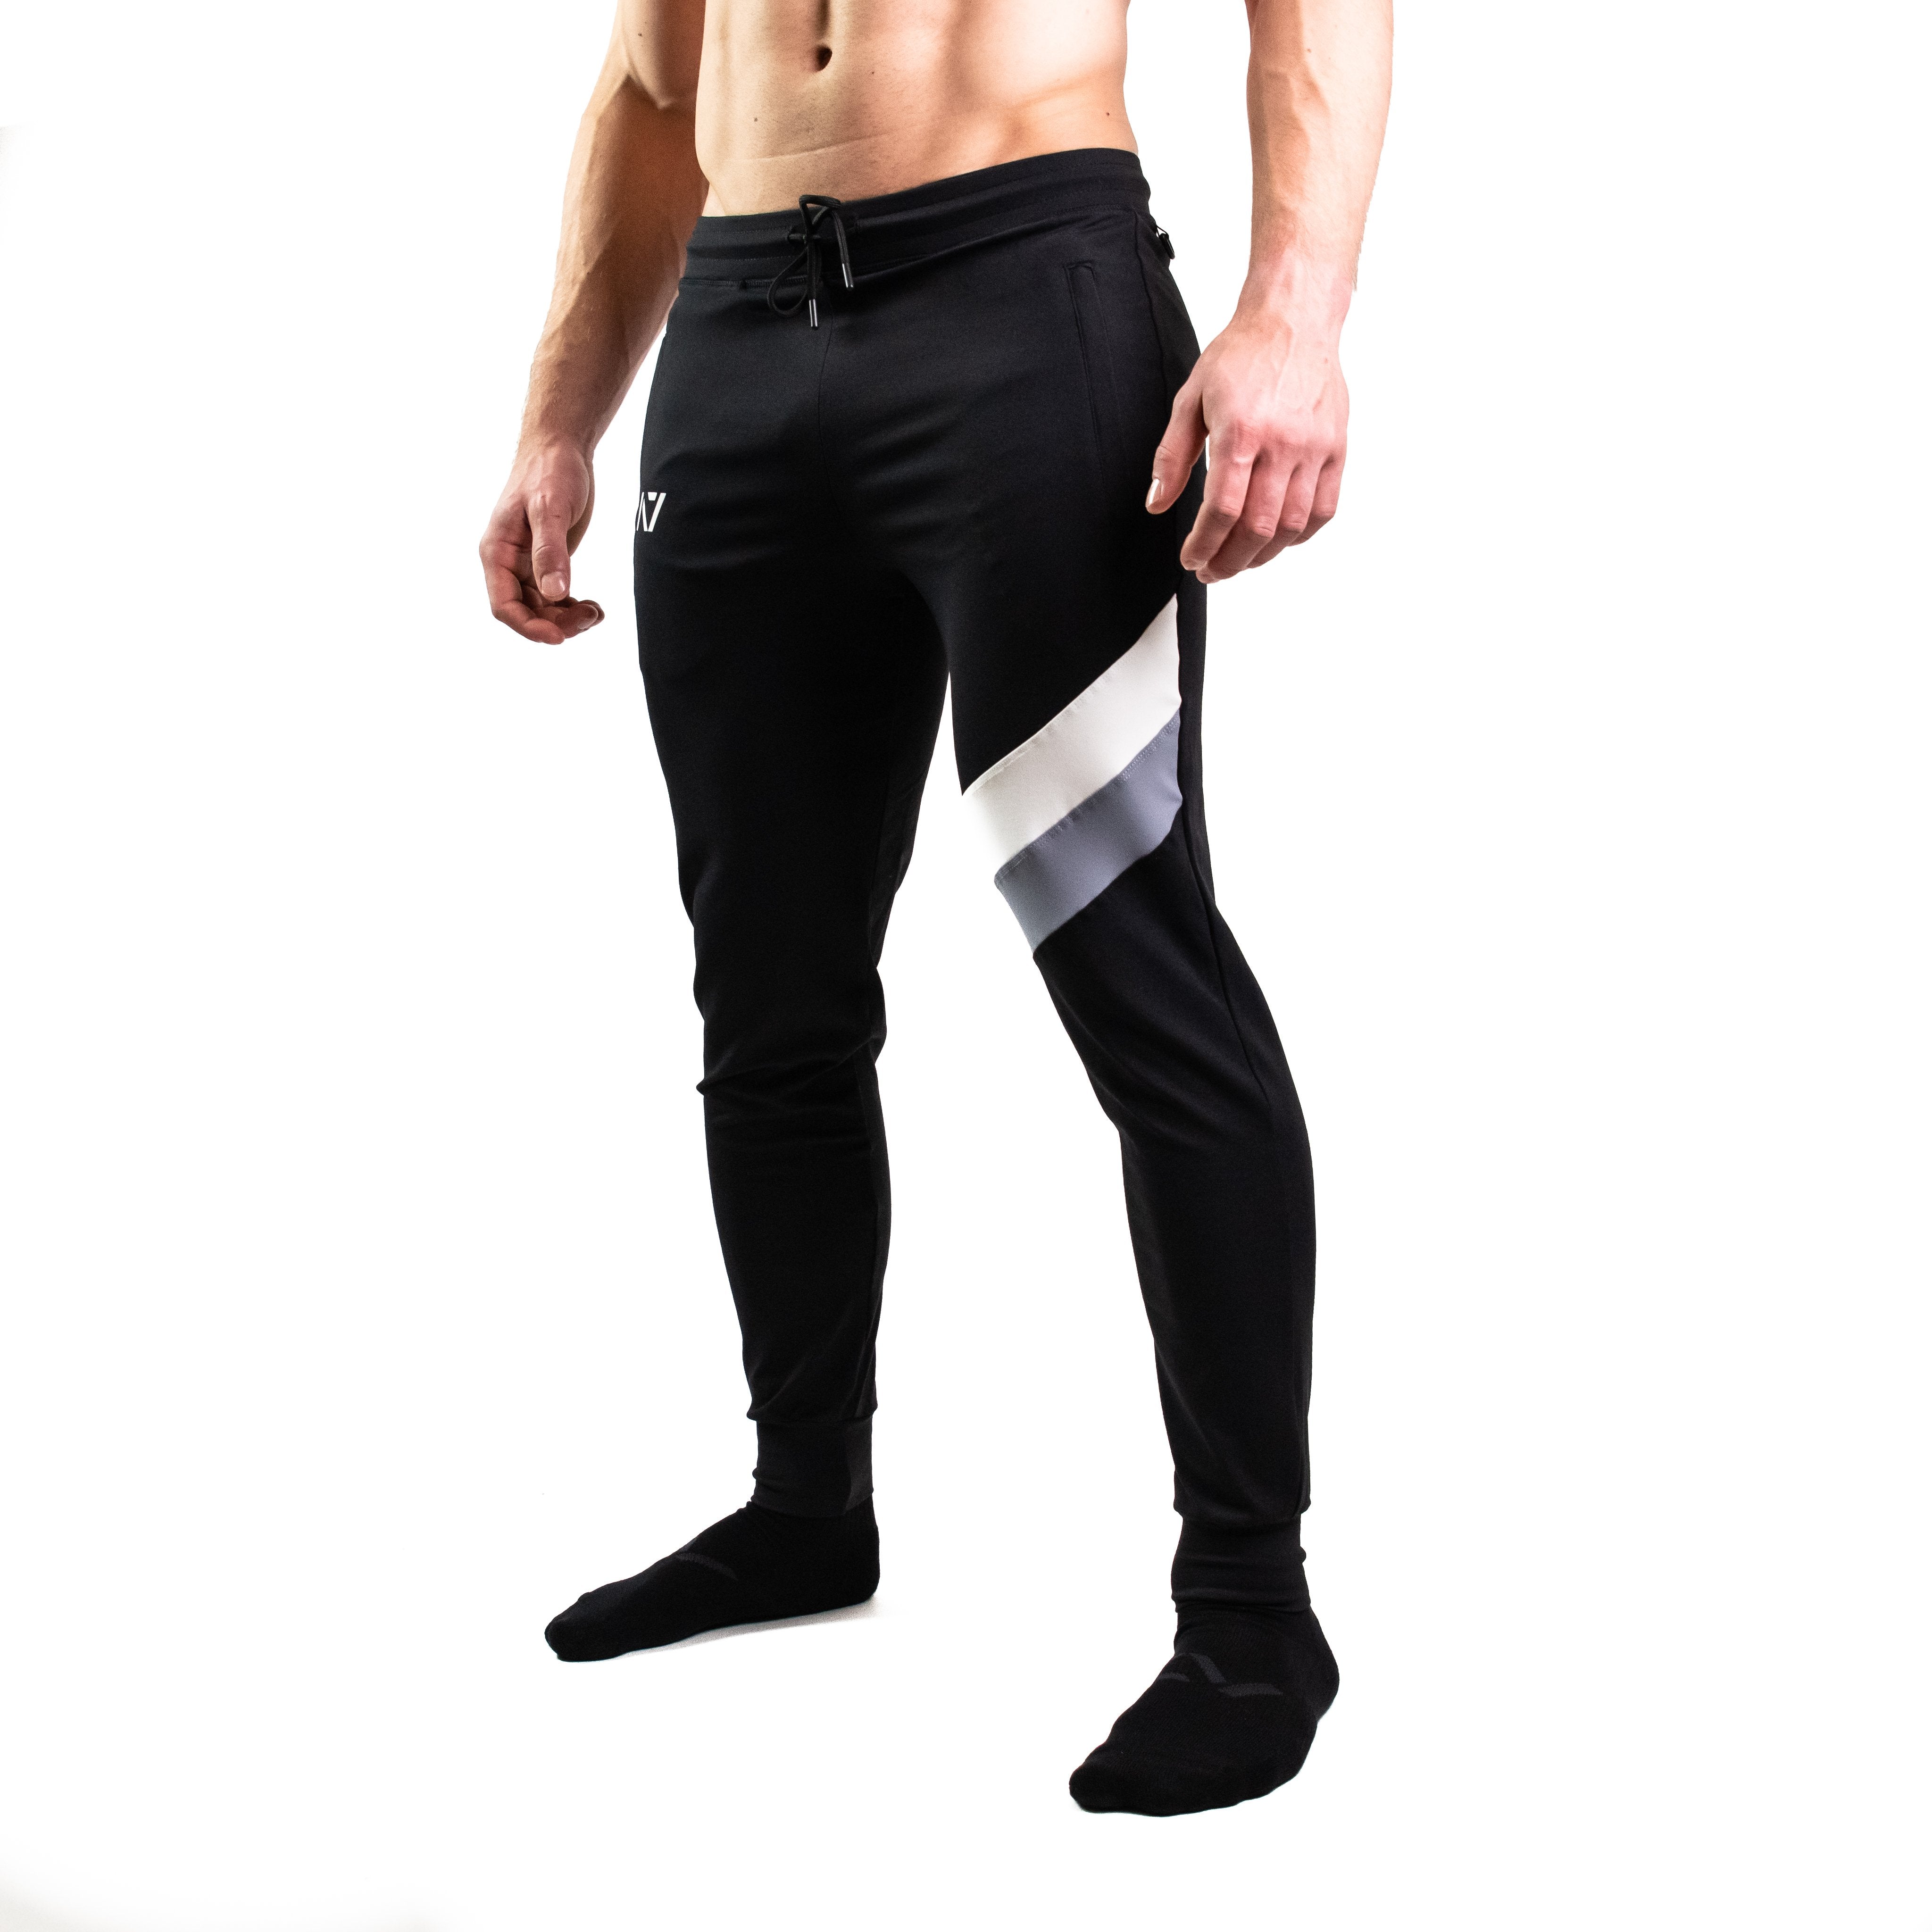 Defy Joggers have likely become a staple in your wardrobe. With our newest Monochrome design colourway we set out to provide a unique yet simple monochrome colour combo to match with all the stealth, gray, white and even more poppy colours of your current collection or many of the pieces we have available.